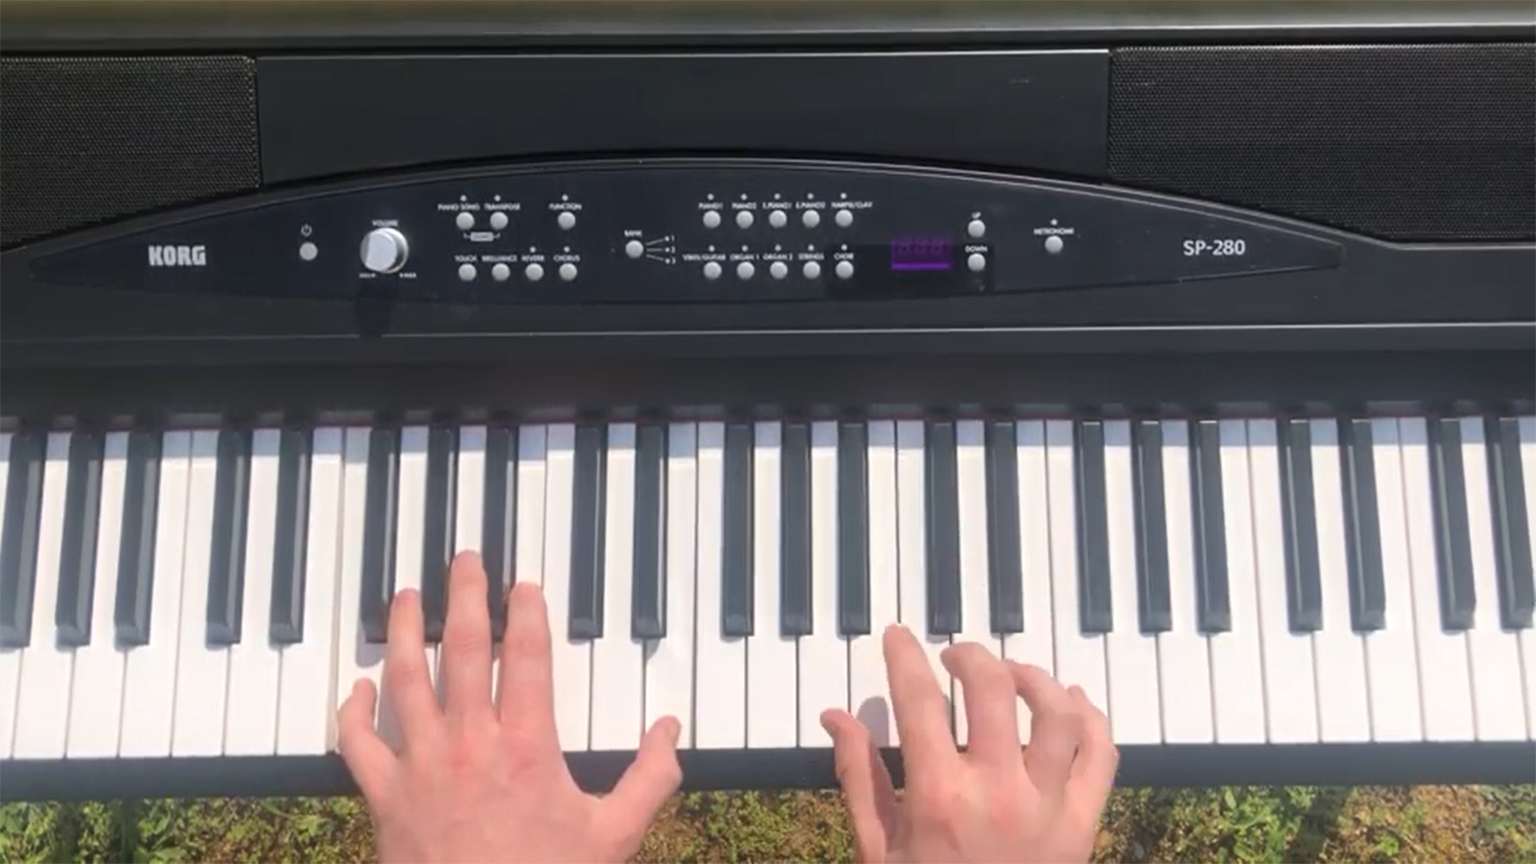 A pair of hands on an electric keyboard.